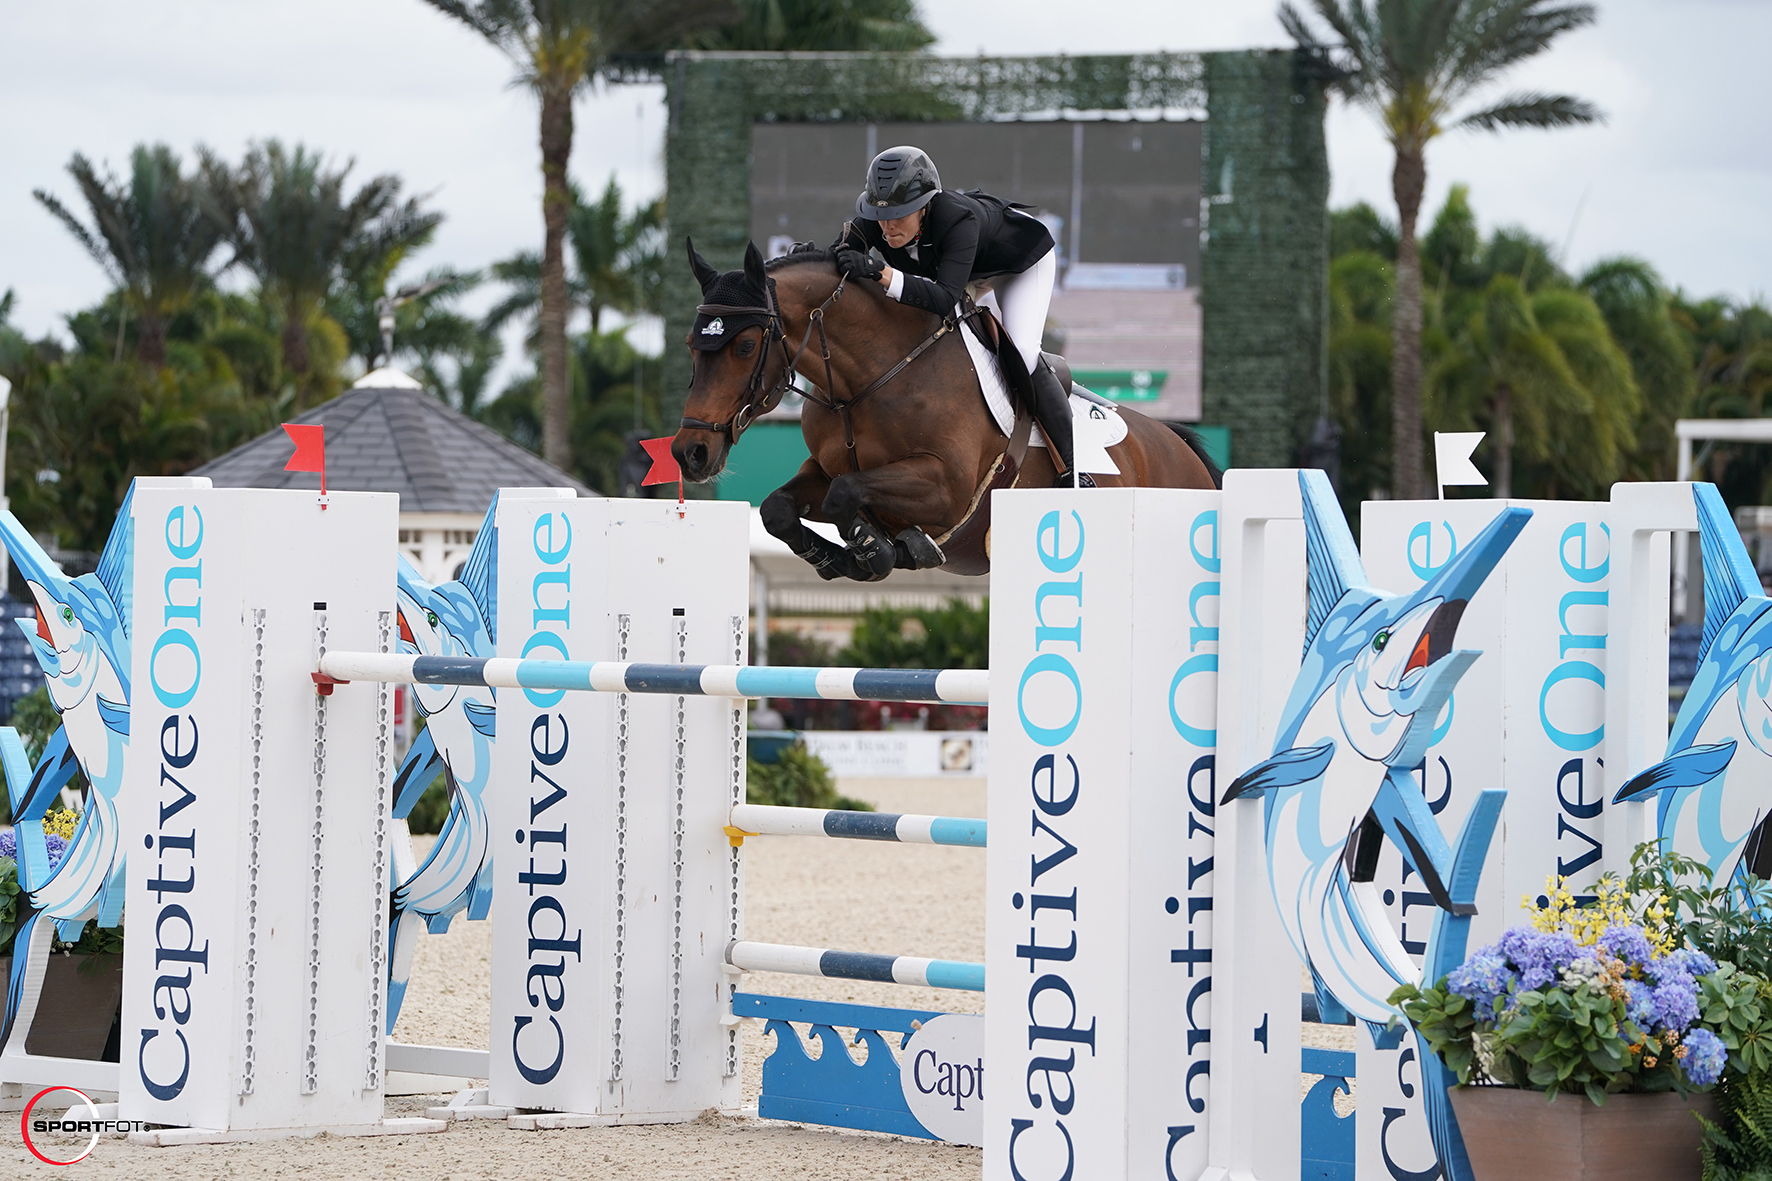 Tiffany Foster wins at WEF. "We need to give the breeders more credit..."